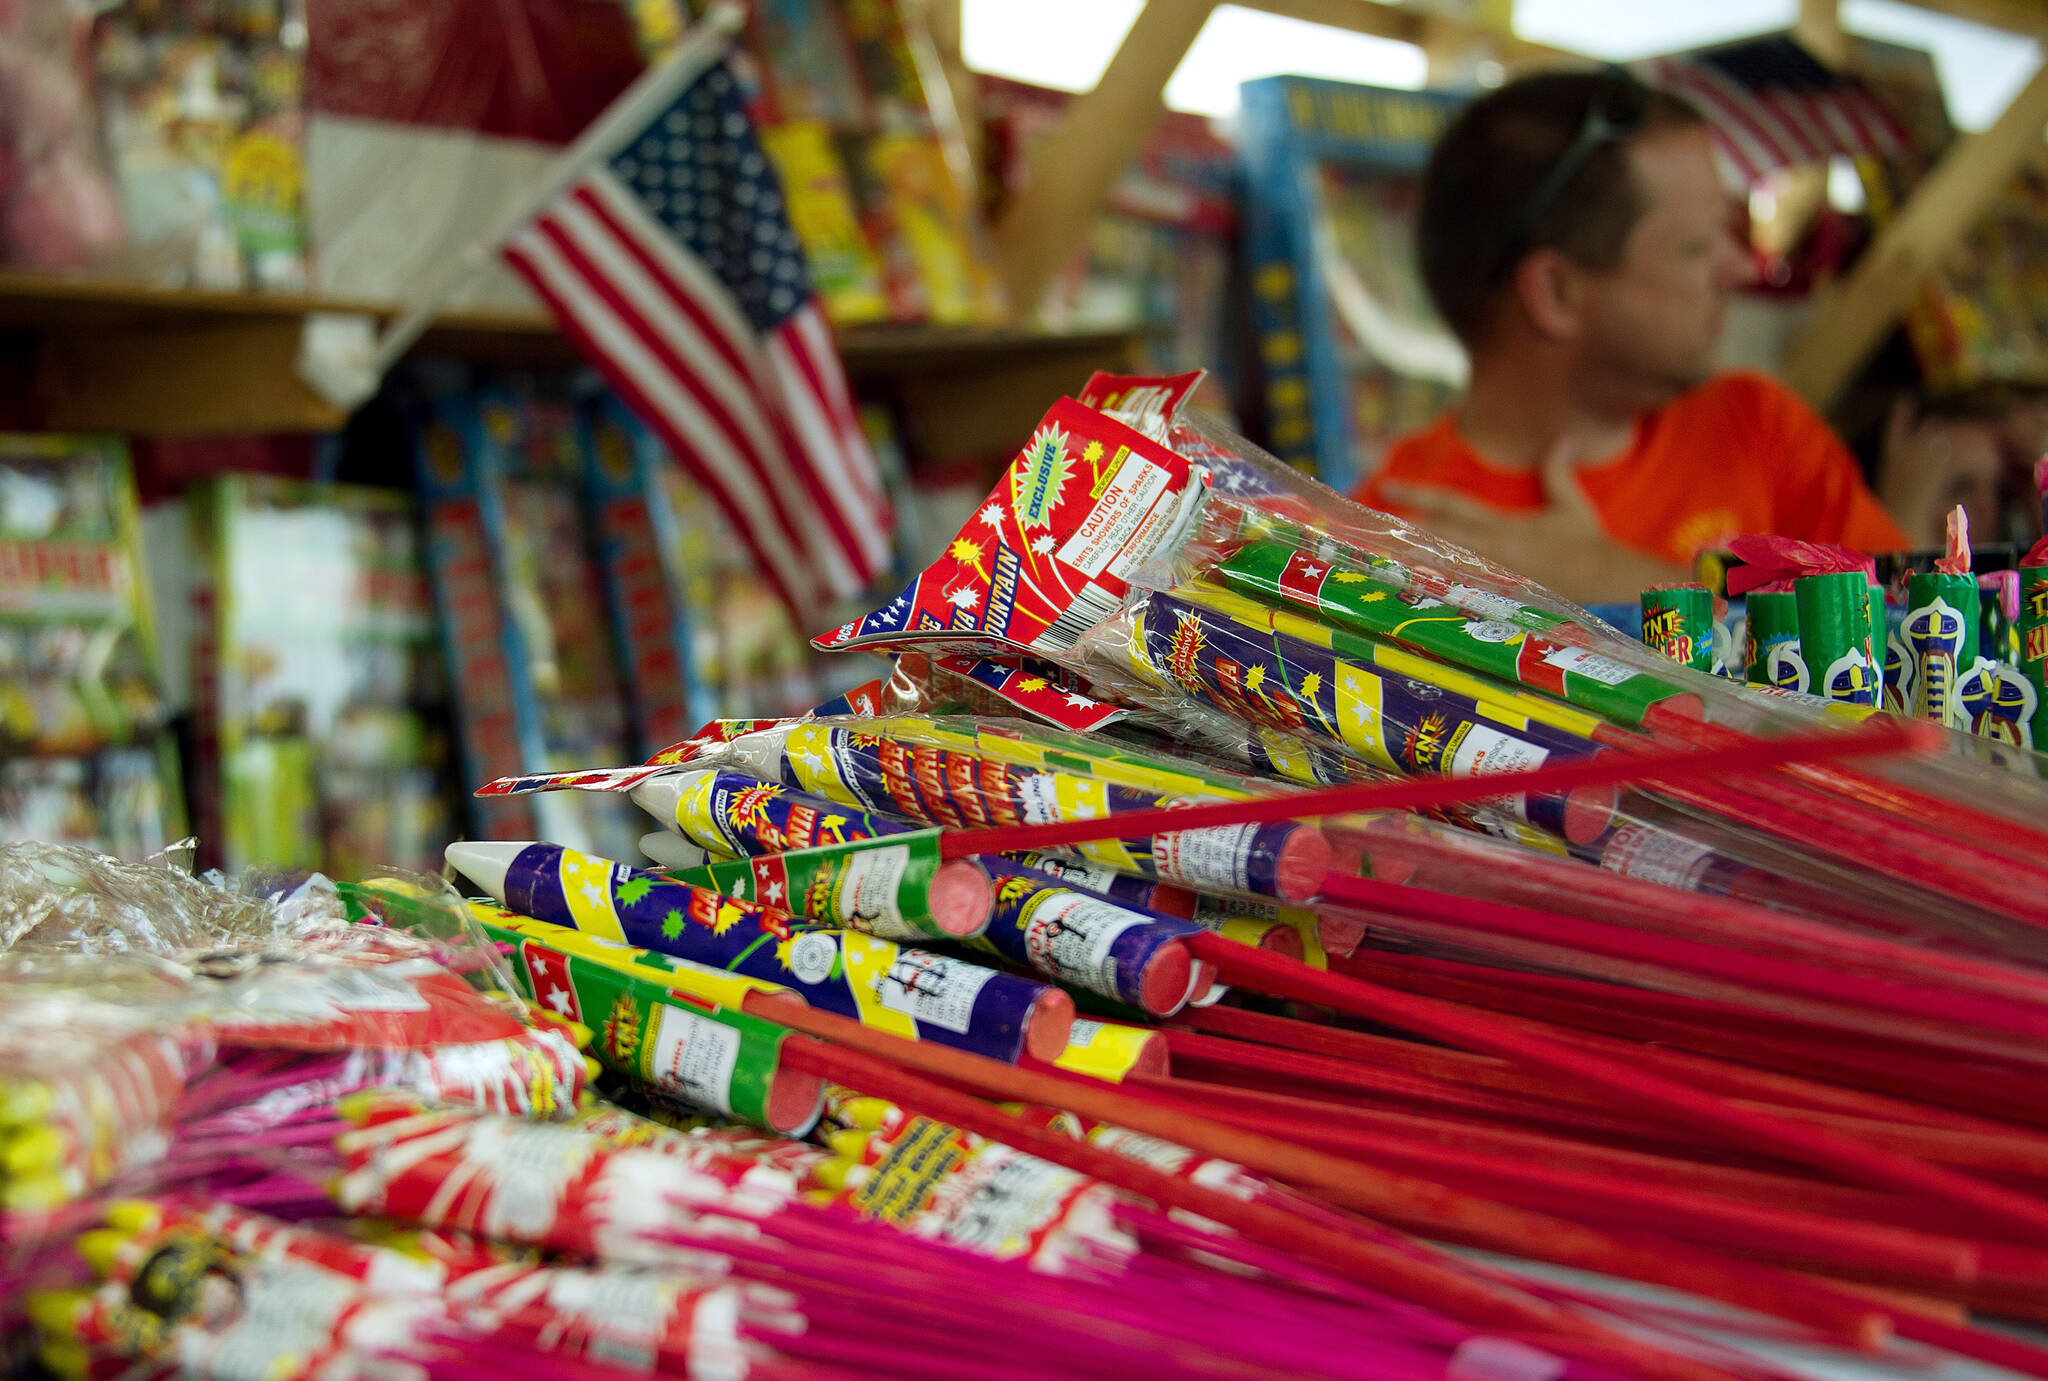 Consumer fireworks are now for sale across Kitsap County, with the exception of Bainbridge Island. (File photo)